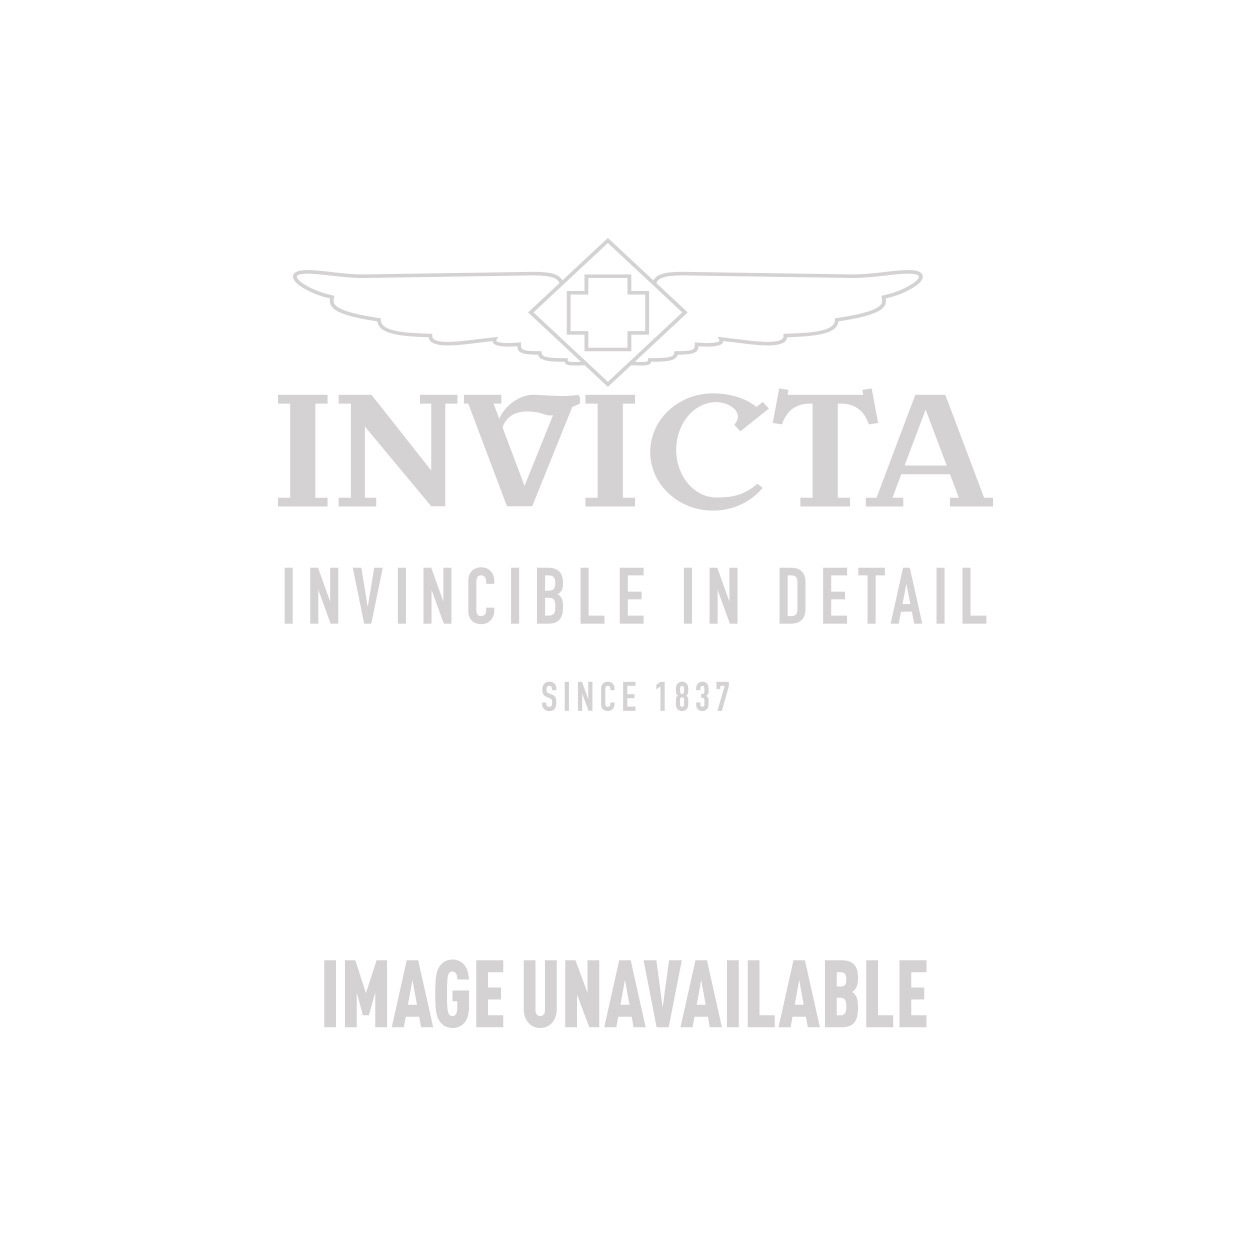 Invincible Guarantee - 100% Replacement Guarantee for Watches, Tier 13- 50-49